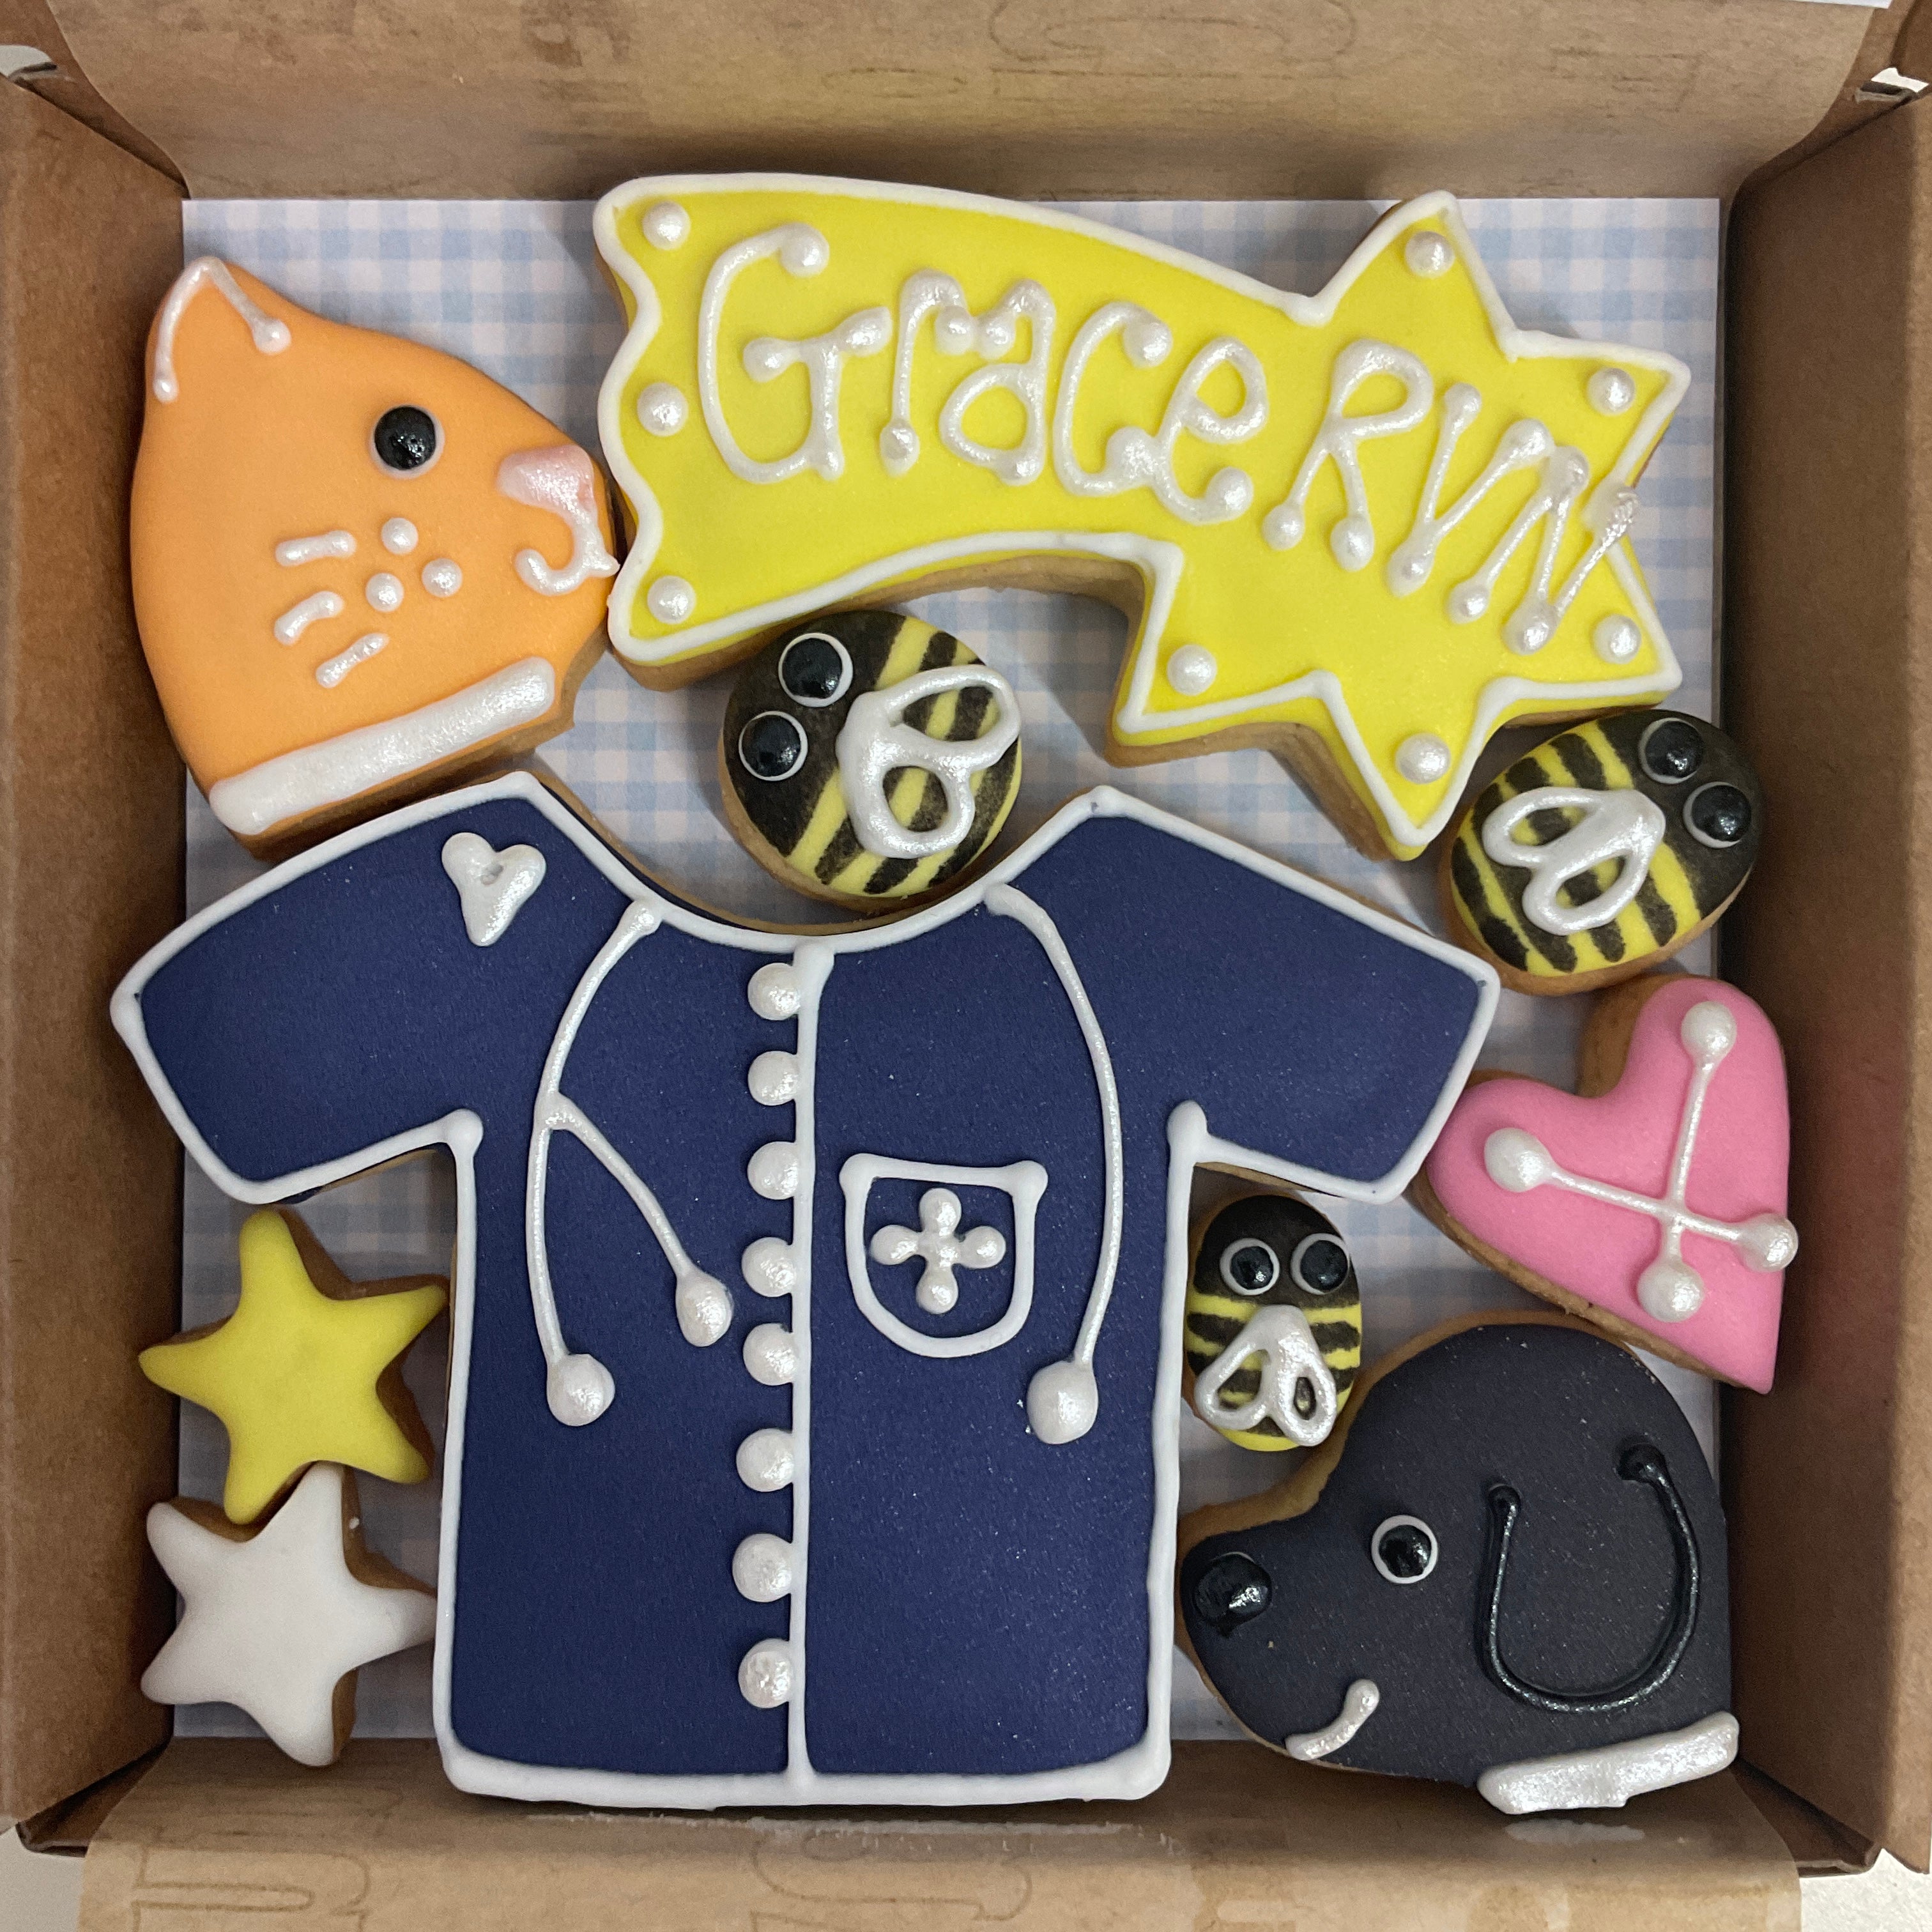 Thank you gift for vet / vet nurse or Pet carer. Delicious personalised cookies. Letterbox gift. Navy Blue Tunic